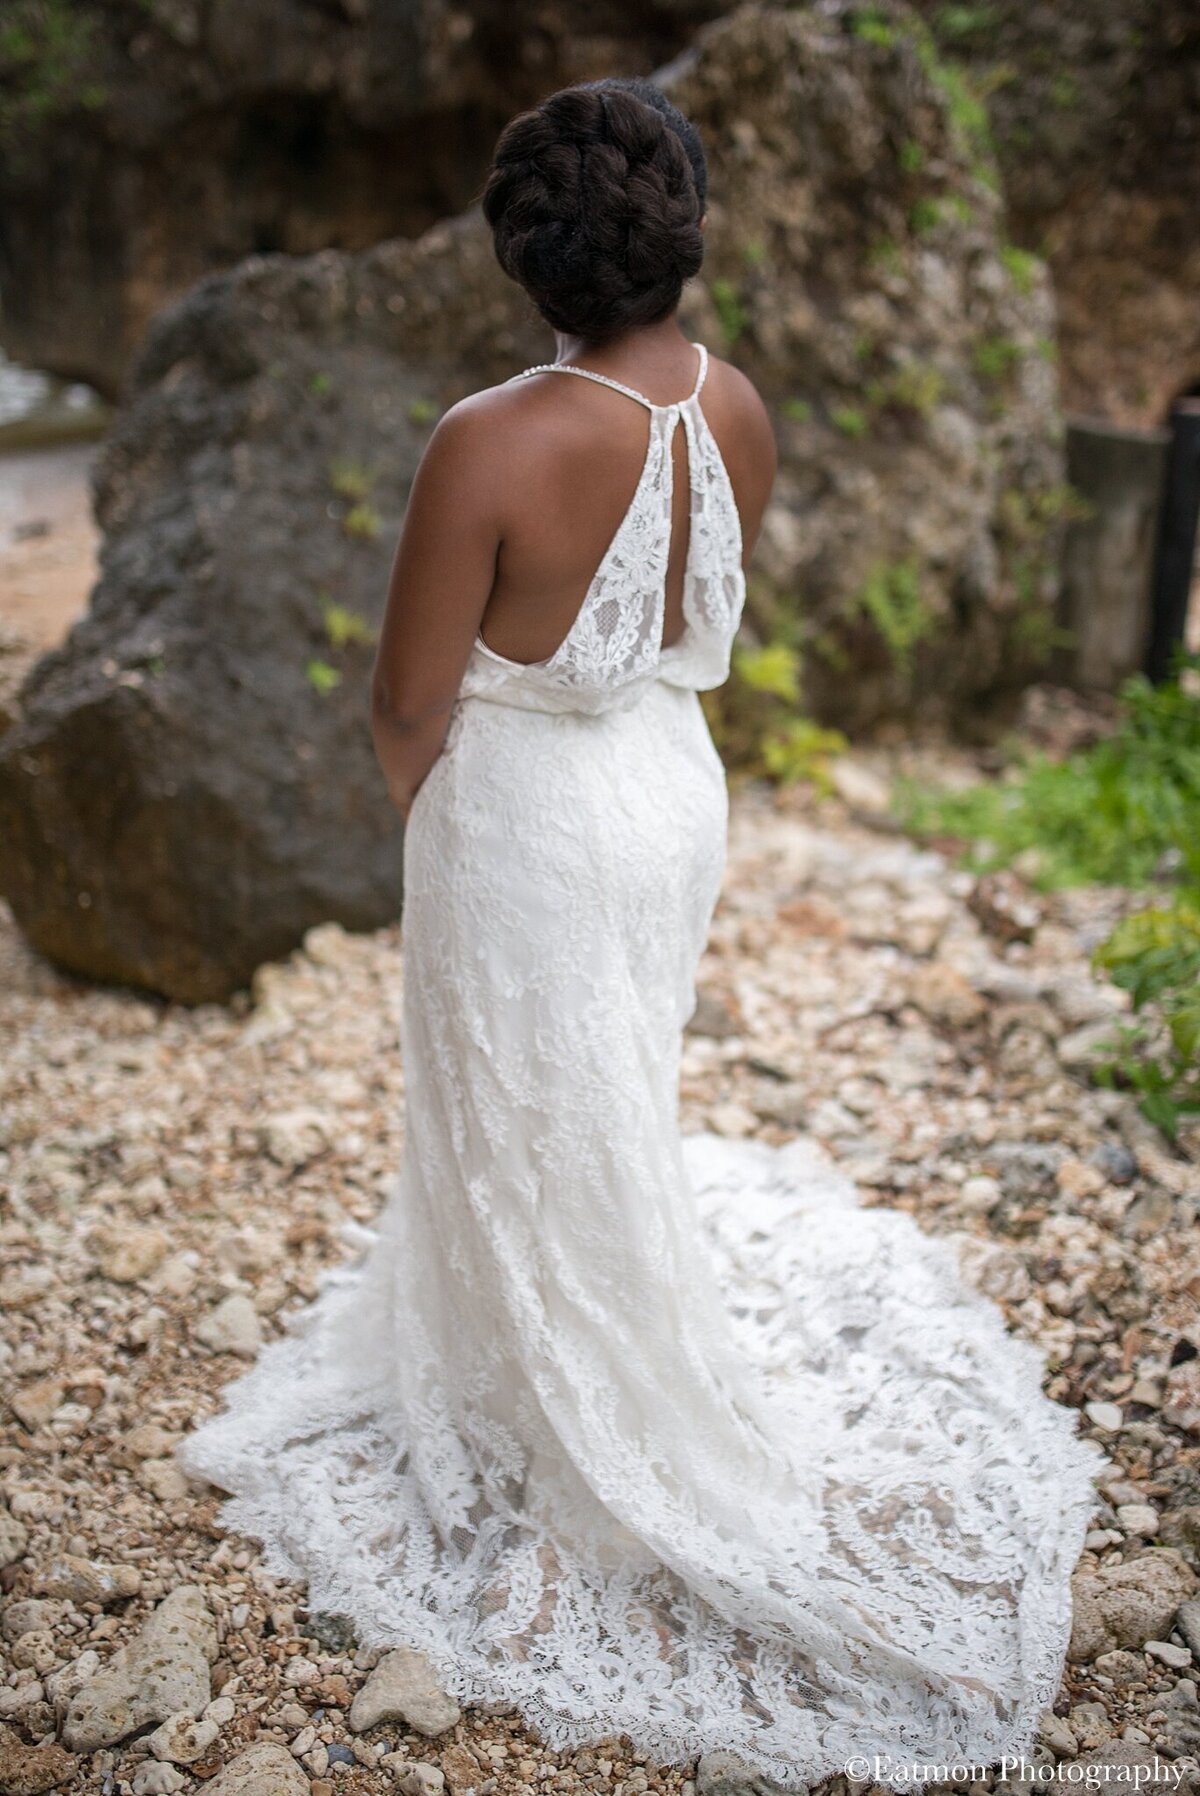 The romantic floral lace and short train of the Sabine wedding dress style make it a good bridal option for a beach elopement wedding ceremony.